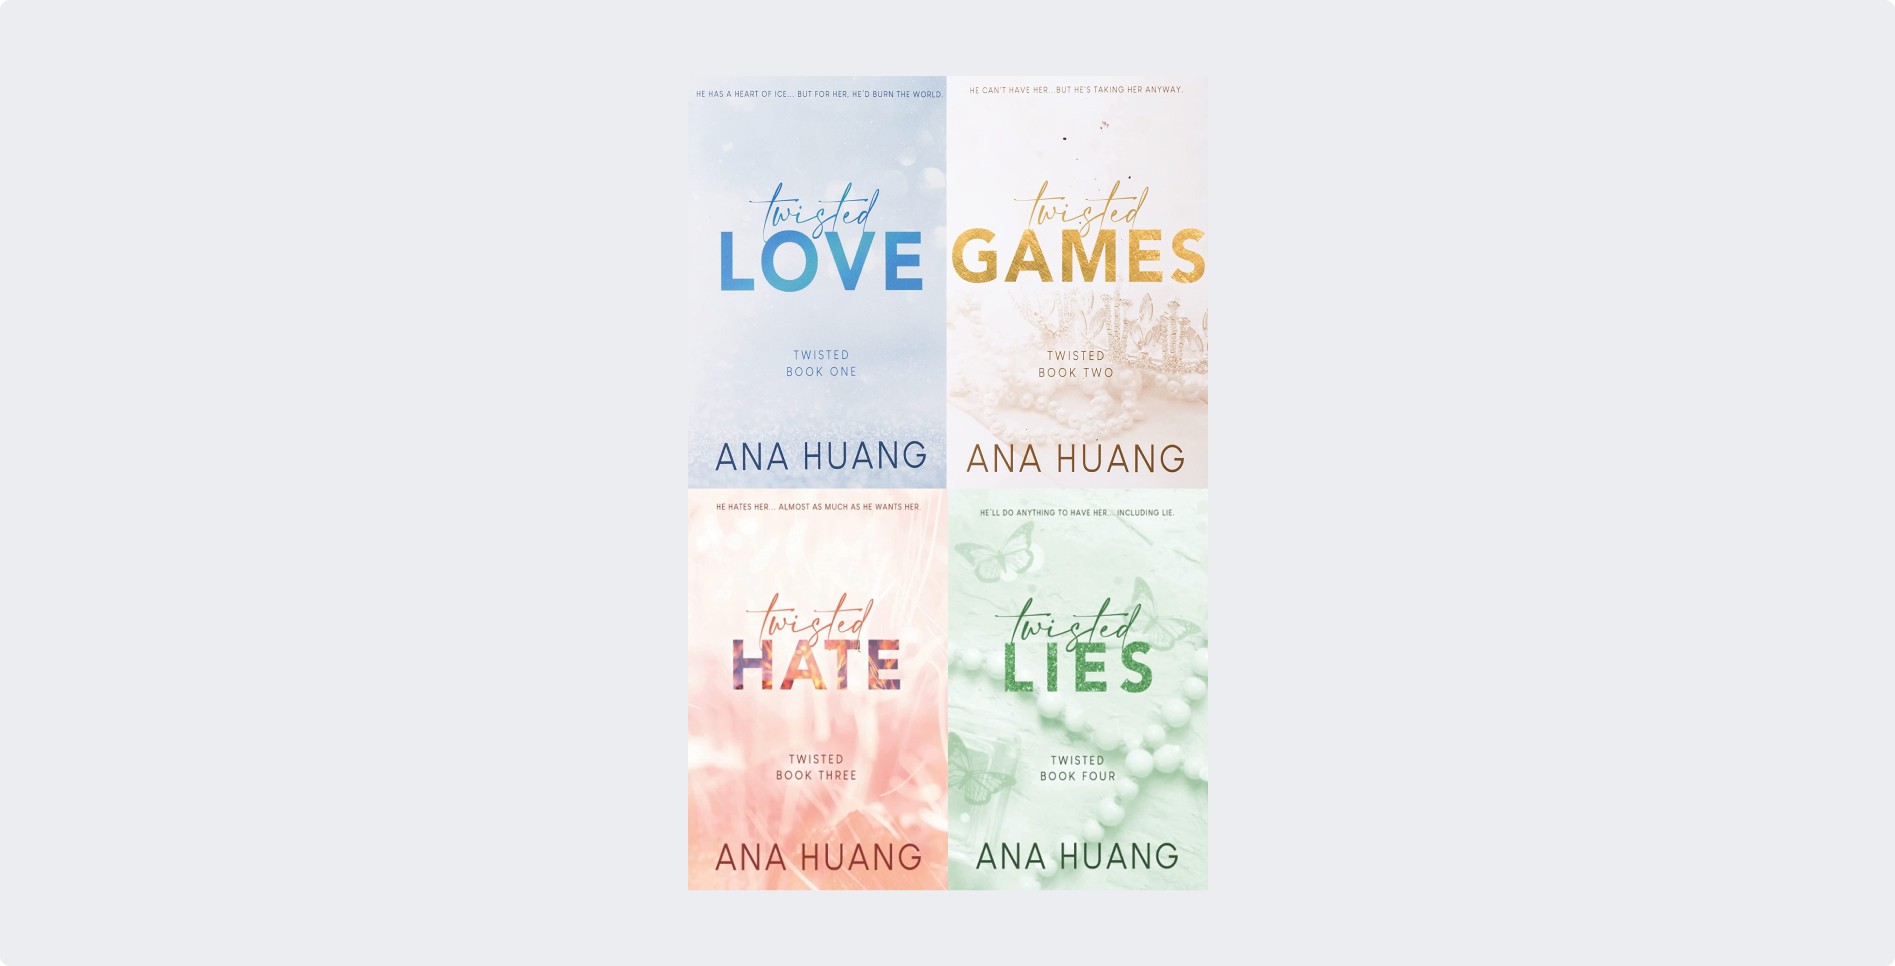 Twisted series by the infamous Ana Huang